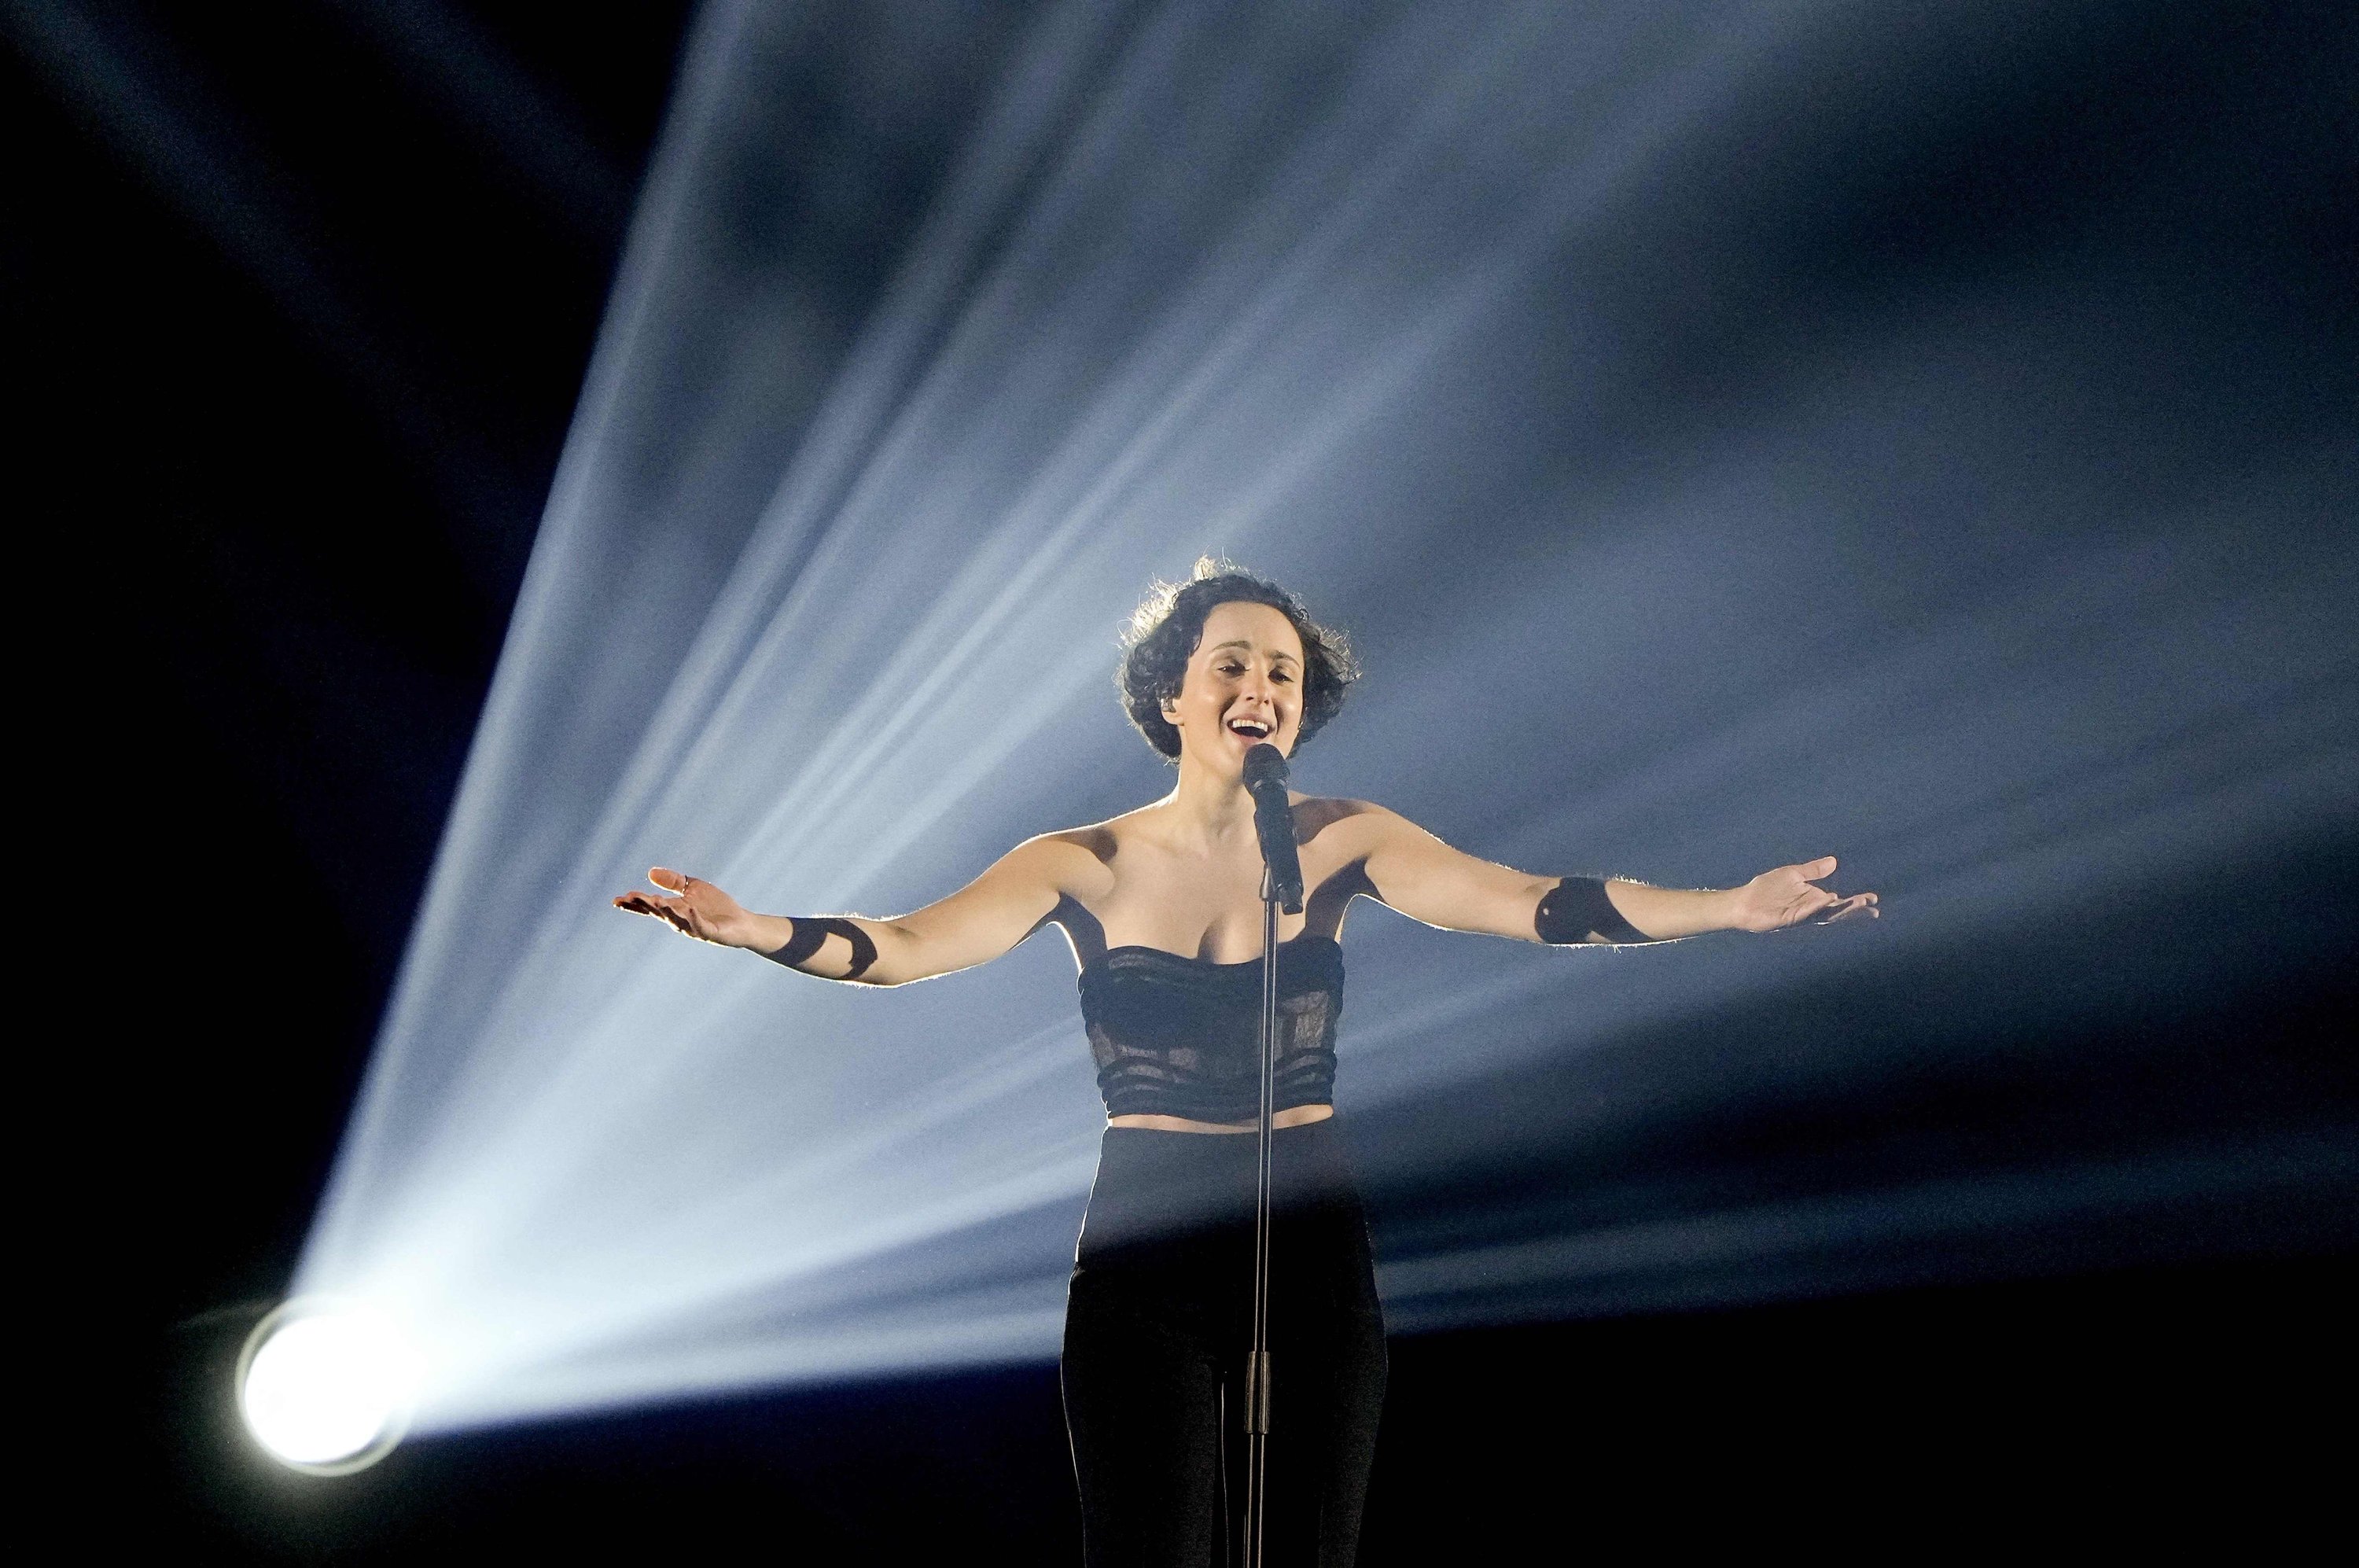 Barbara Pravi from France performs the song "Voila"  during the dress rehearsal of the final of the Eurovision Song Contest in Rotterdam, the Netherlands, May 21, 2021. (AFP Photo)